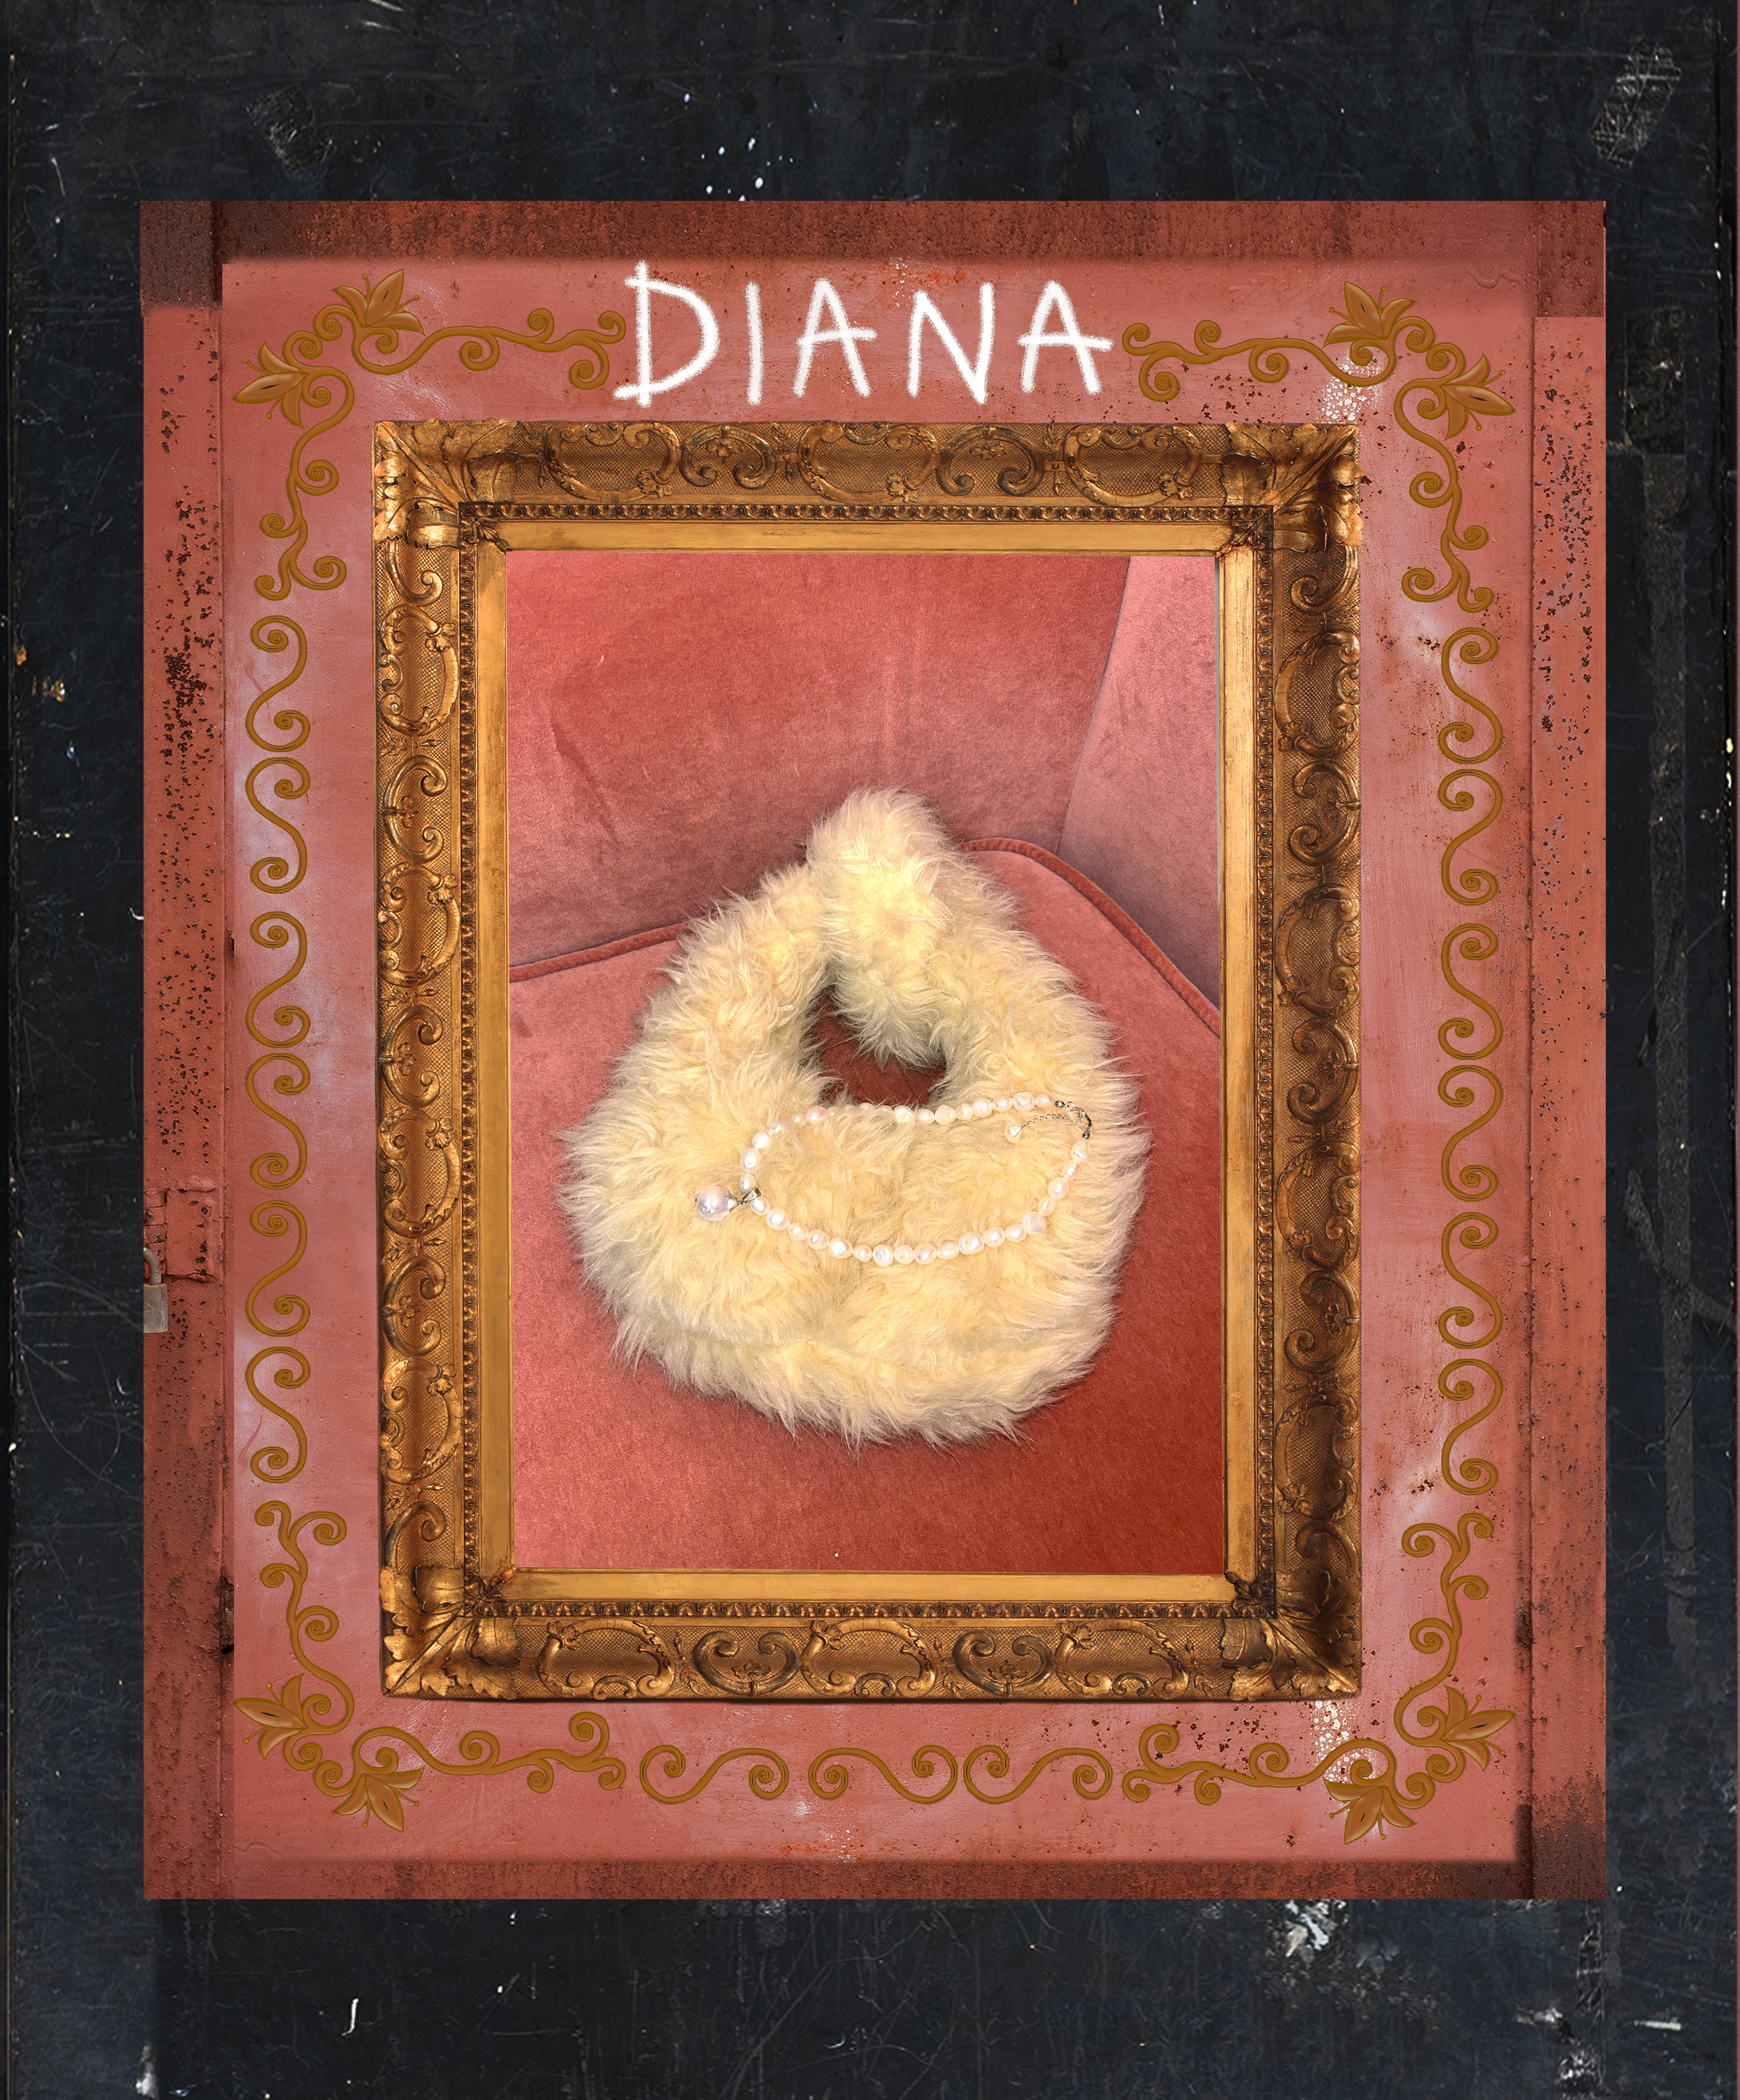 Diana Necklace in White